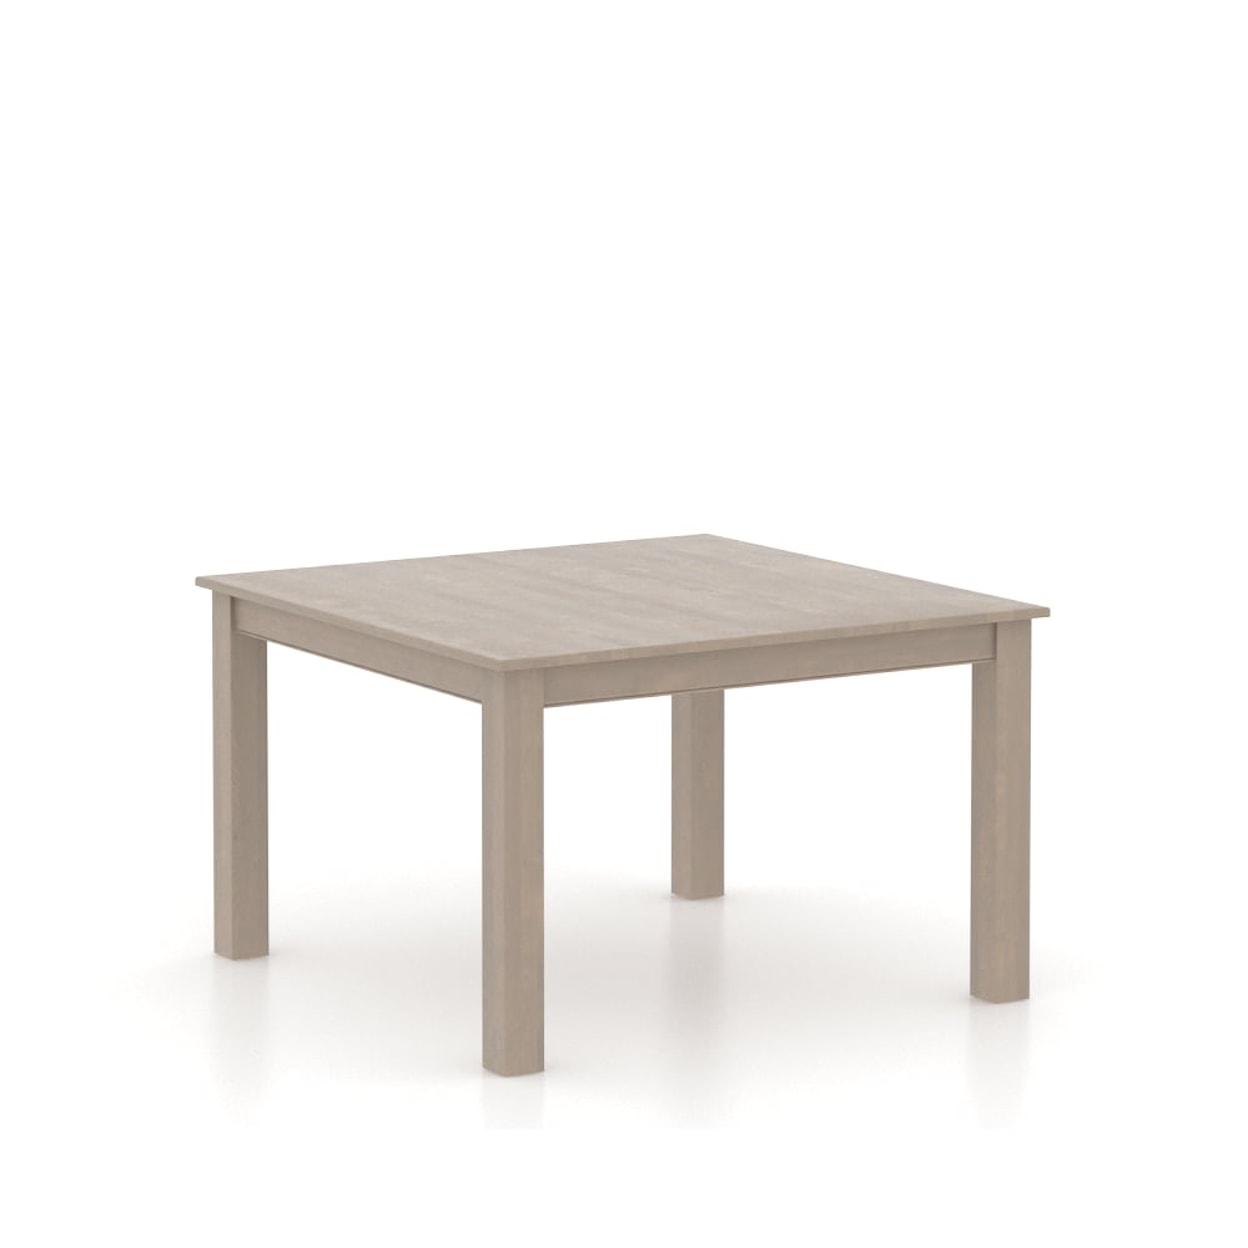 Canadel Gourmet Customizable Square Table with Legs